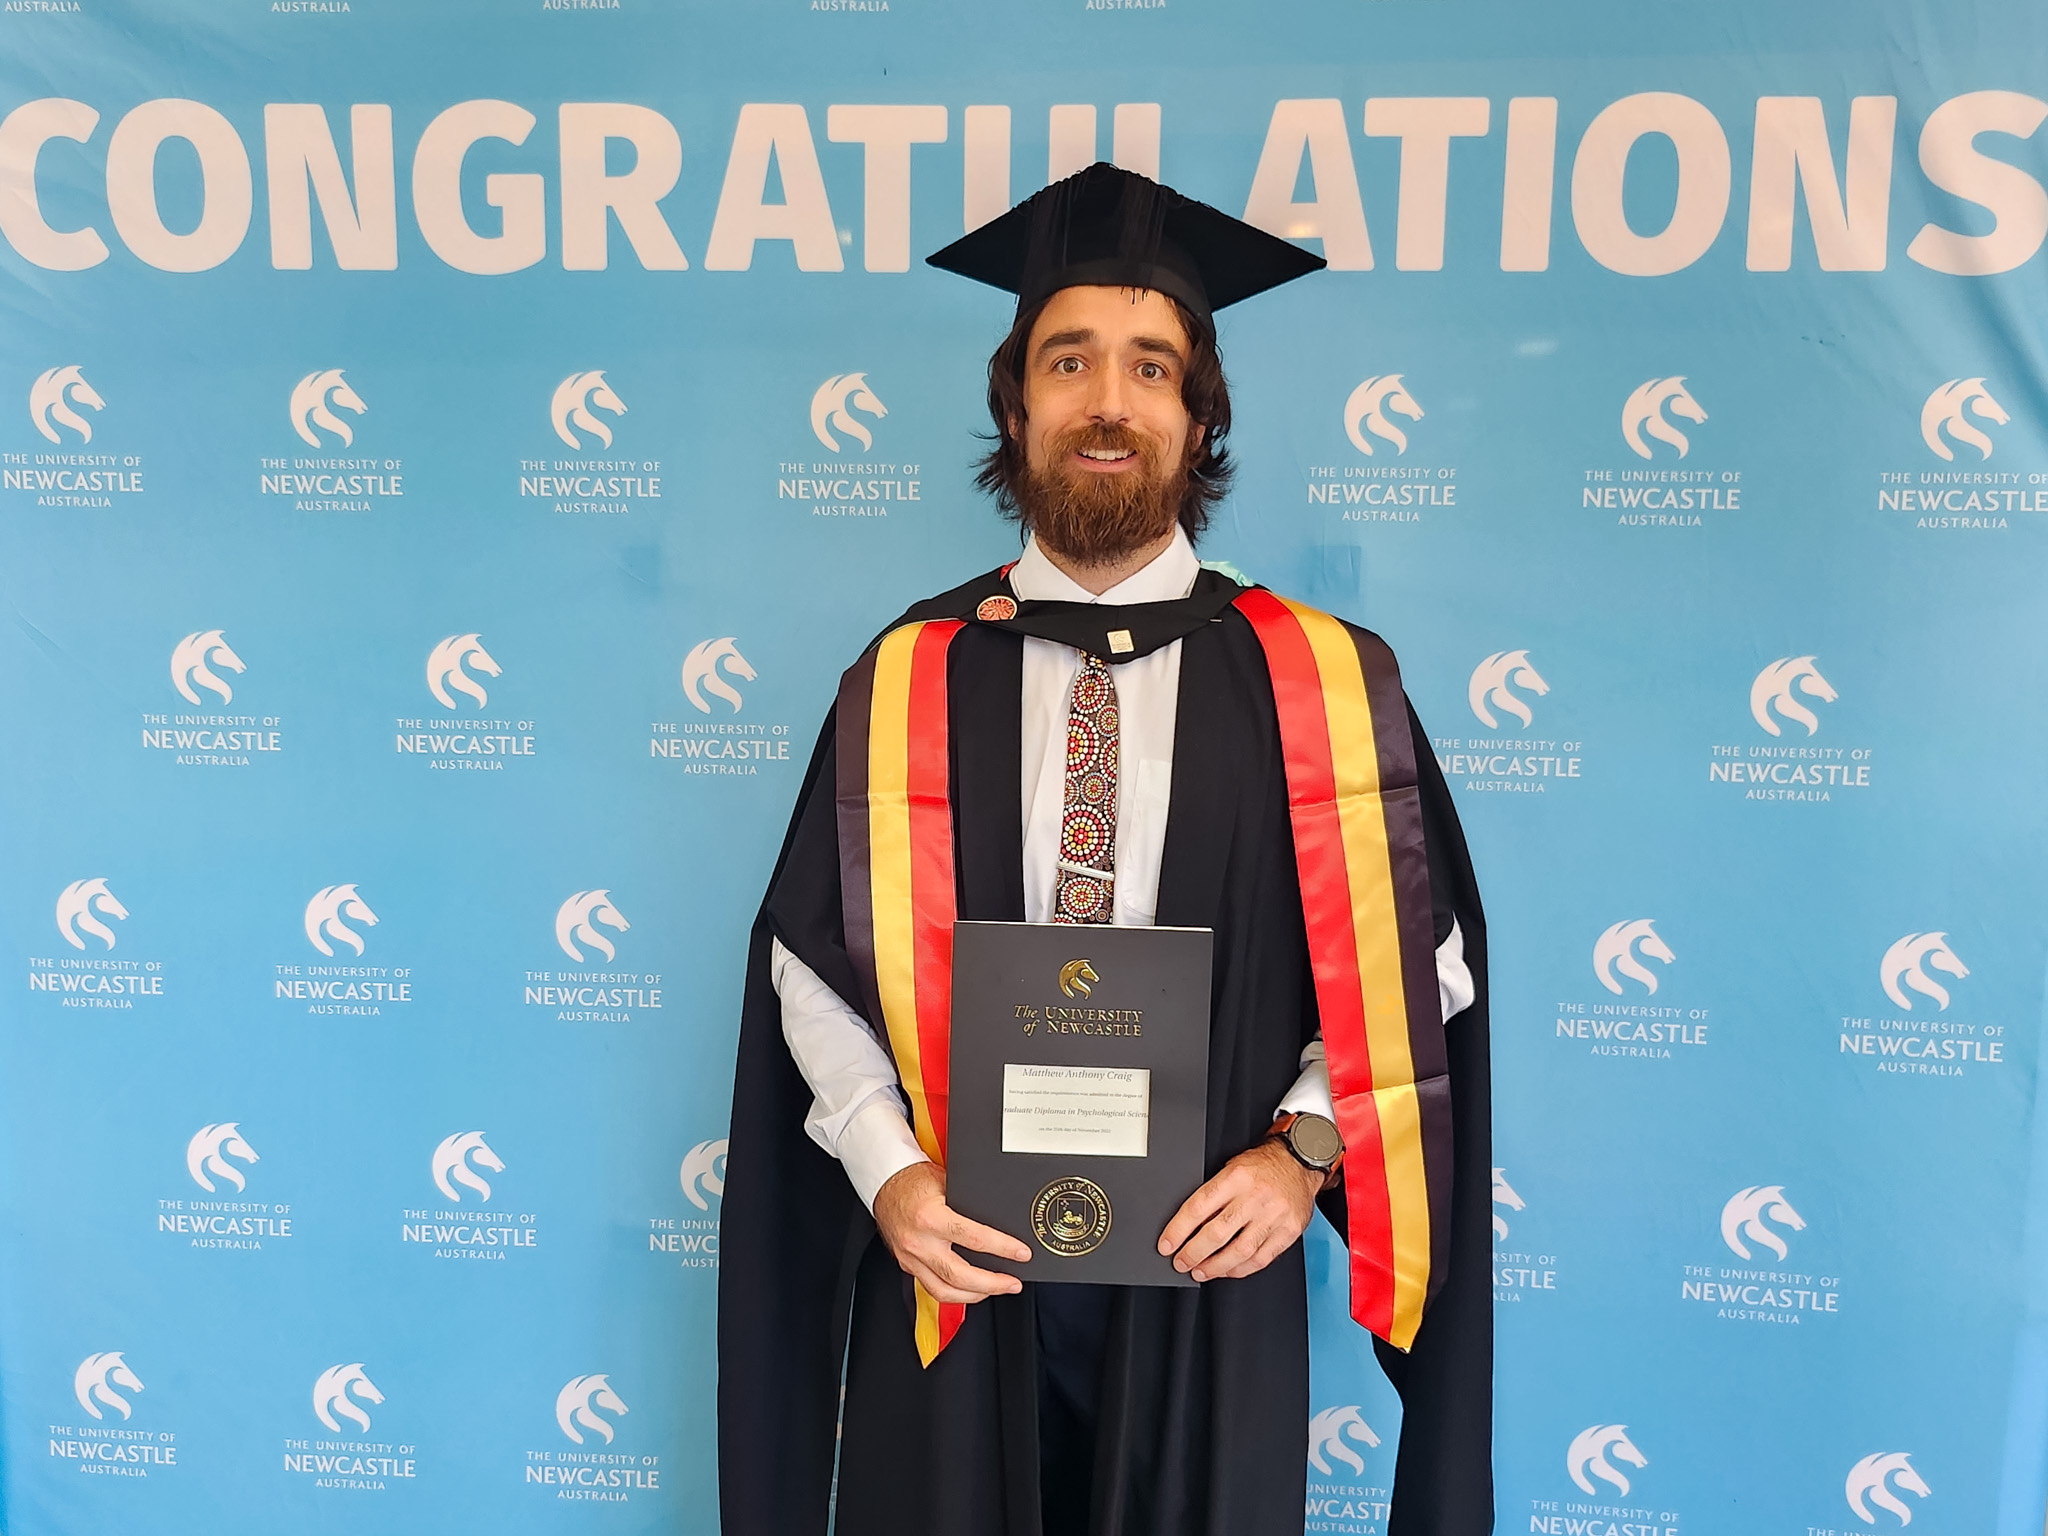 Matthew Craig has graduated from the Graduate Diploma of Psychological Science